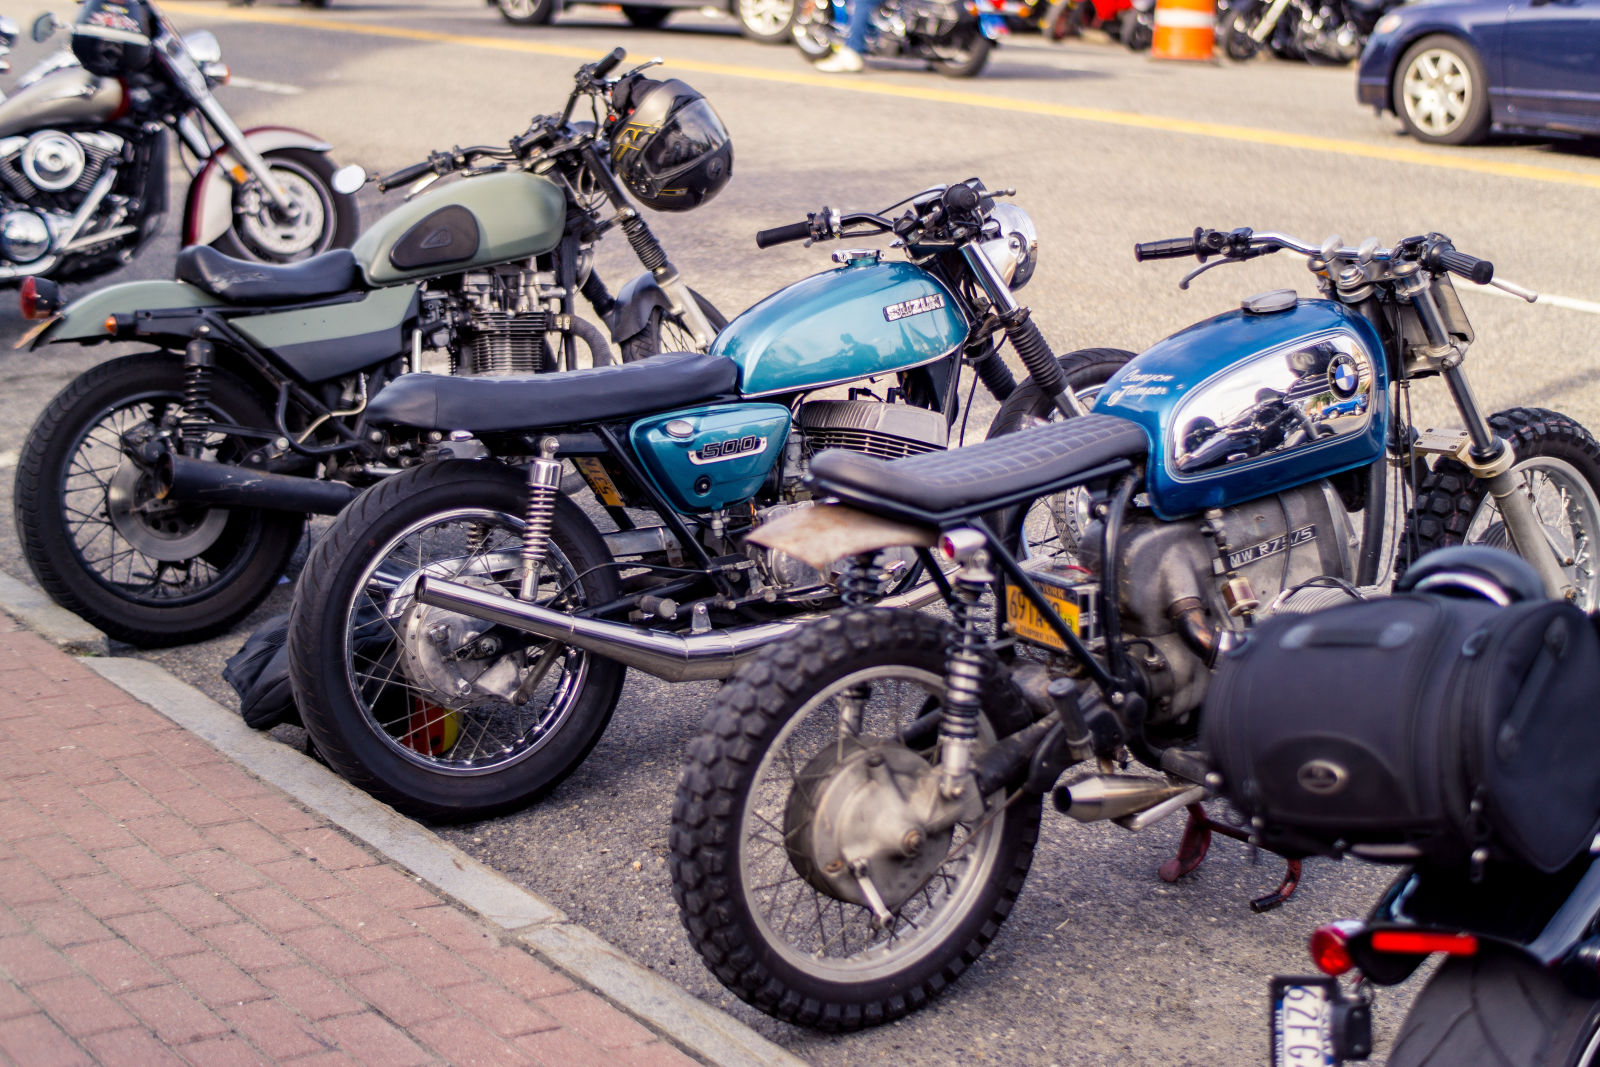 My hunk of junk kz750 twin (olive green) next to a couple of builds from a&amp;j cycle